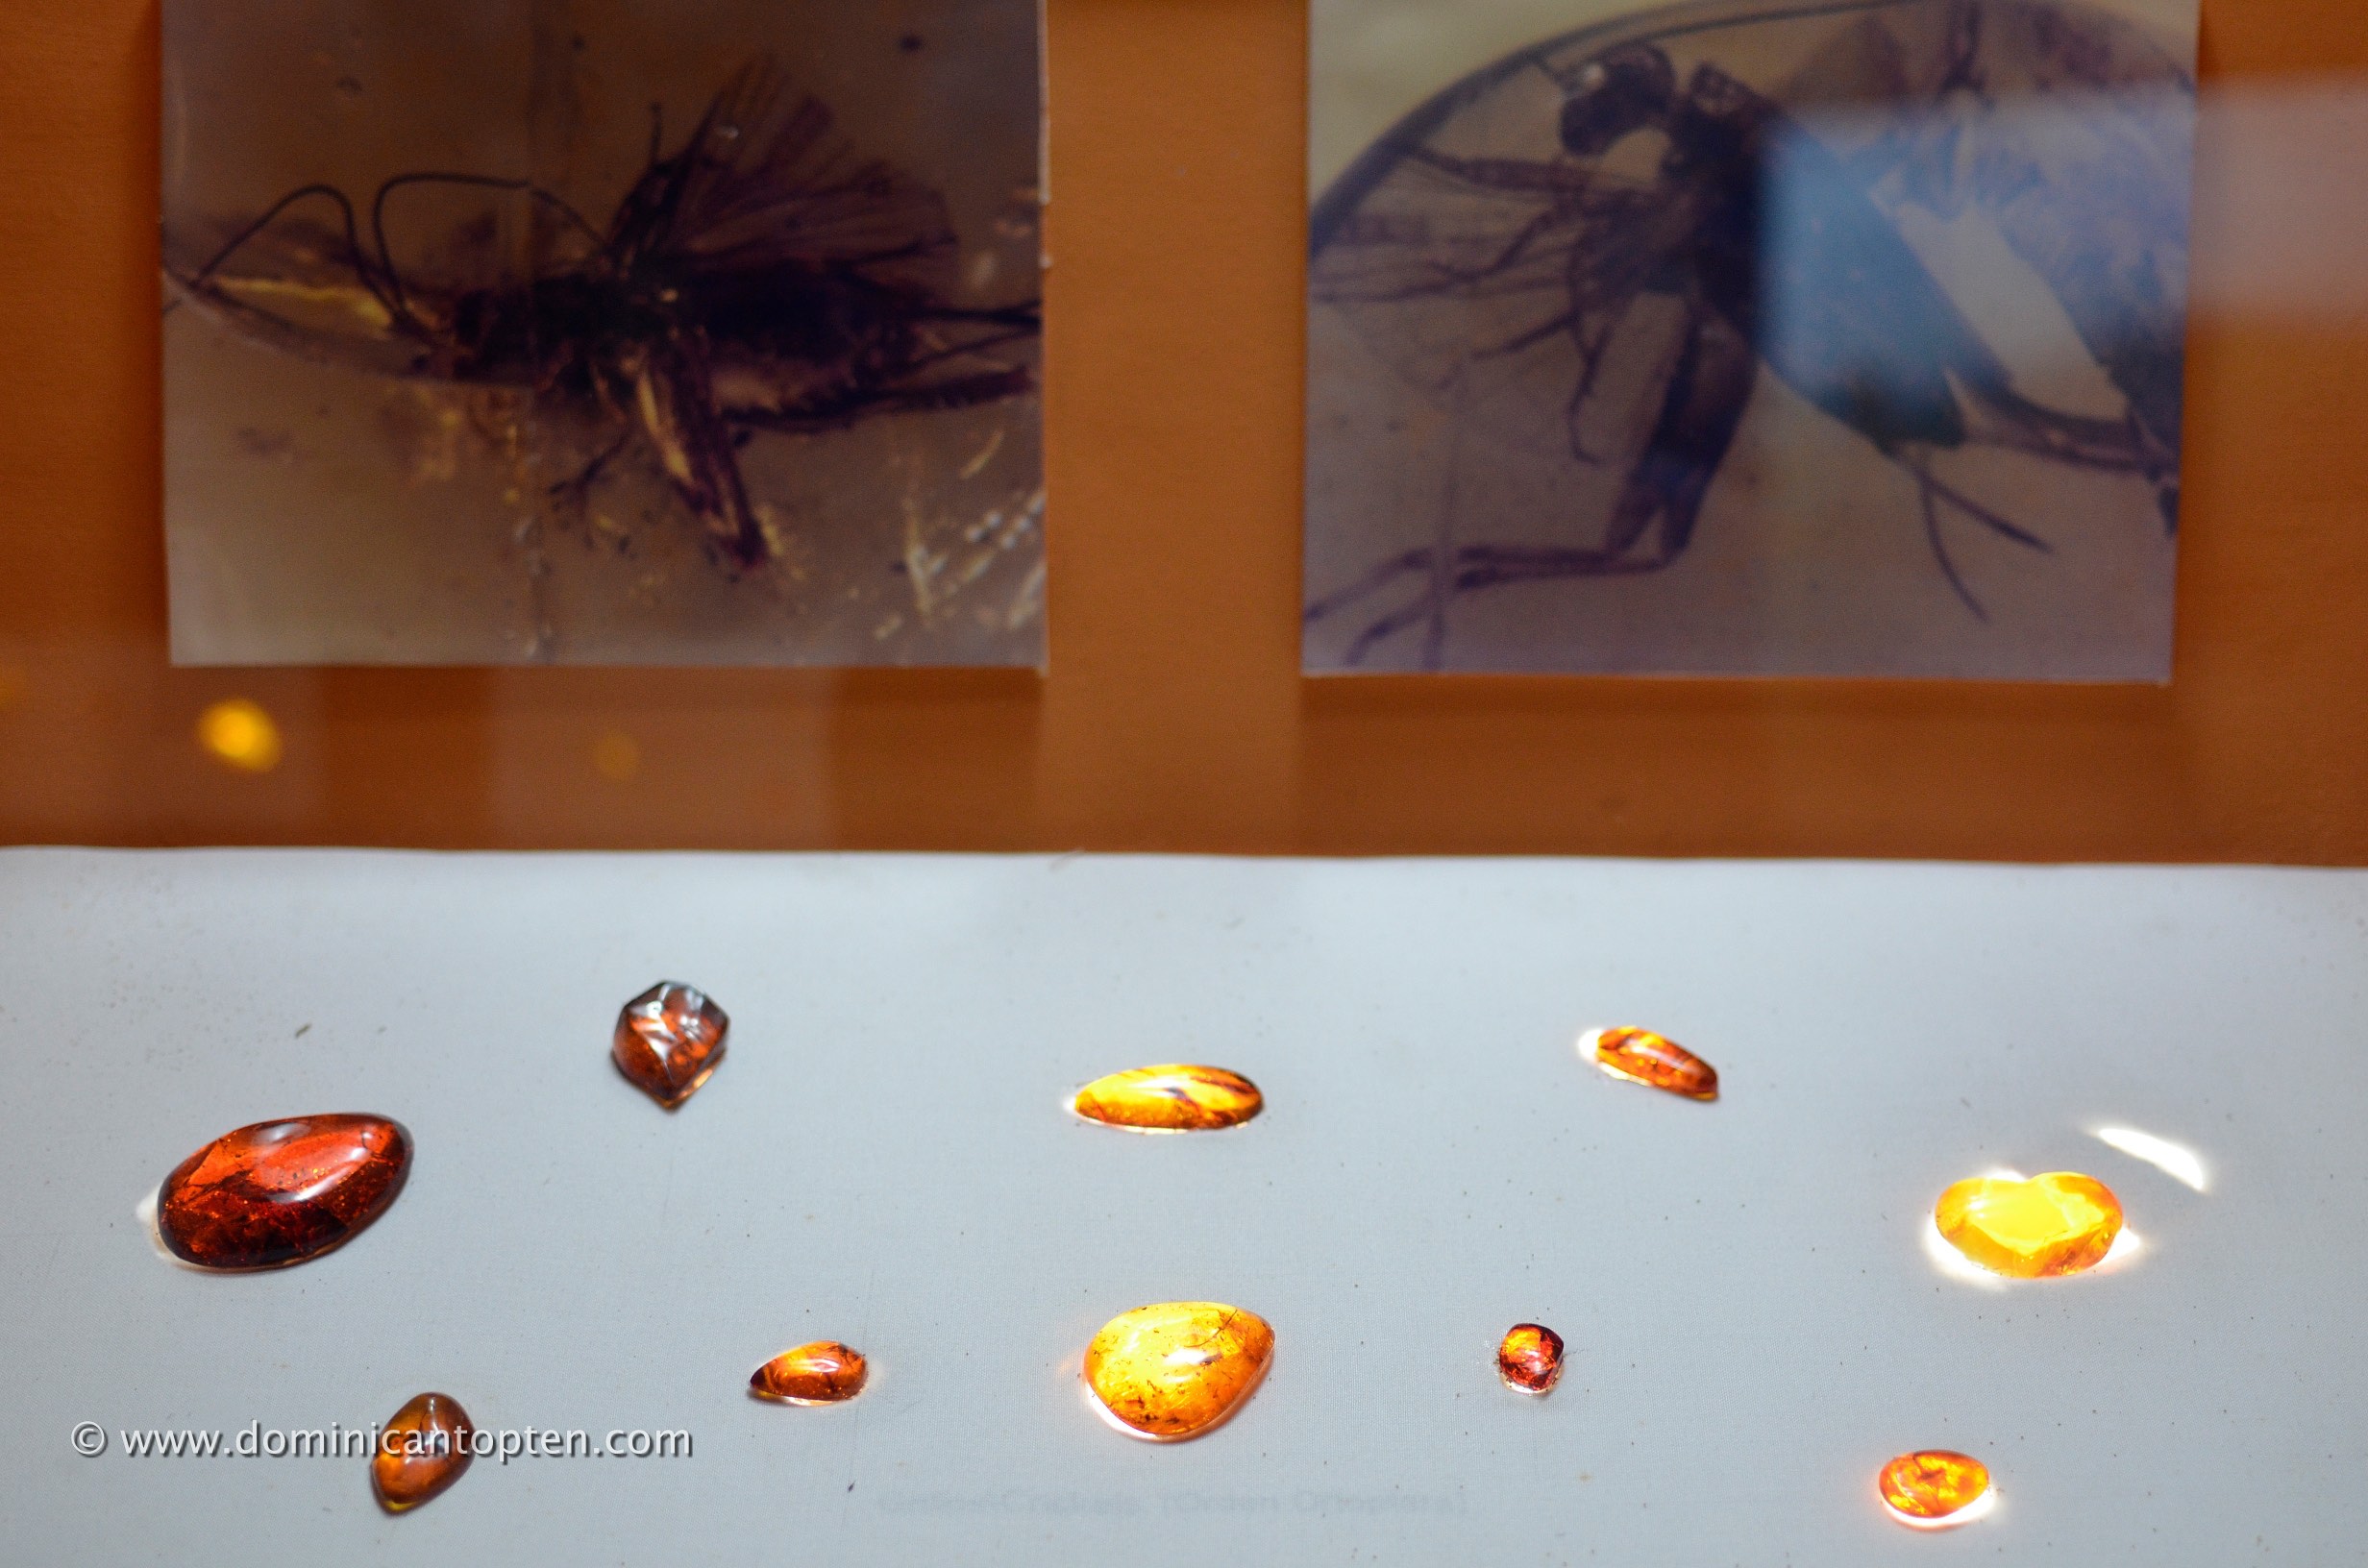 inclusion in amber exhibited at the amber gallery